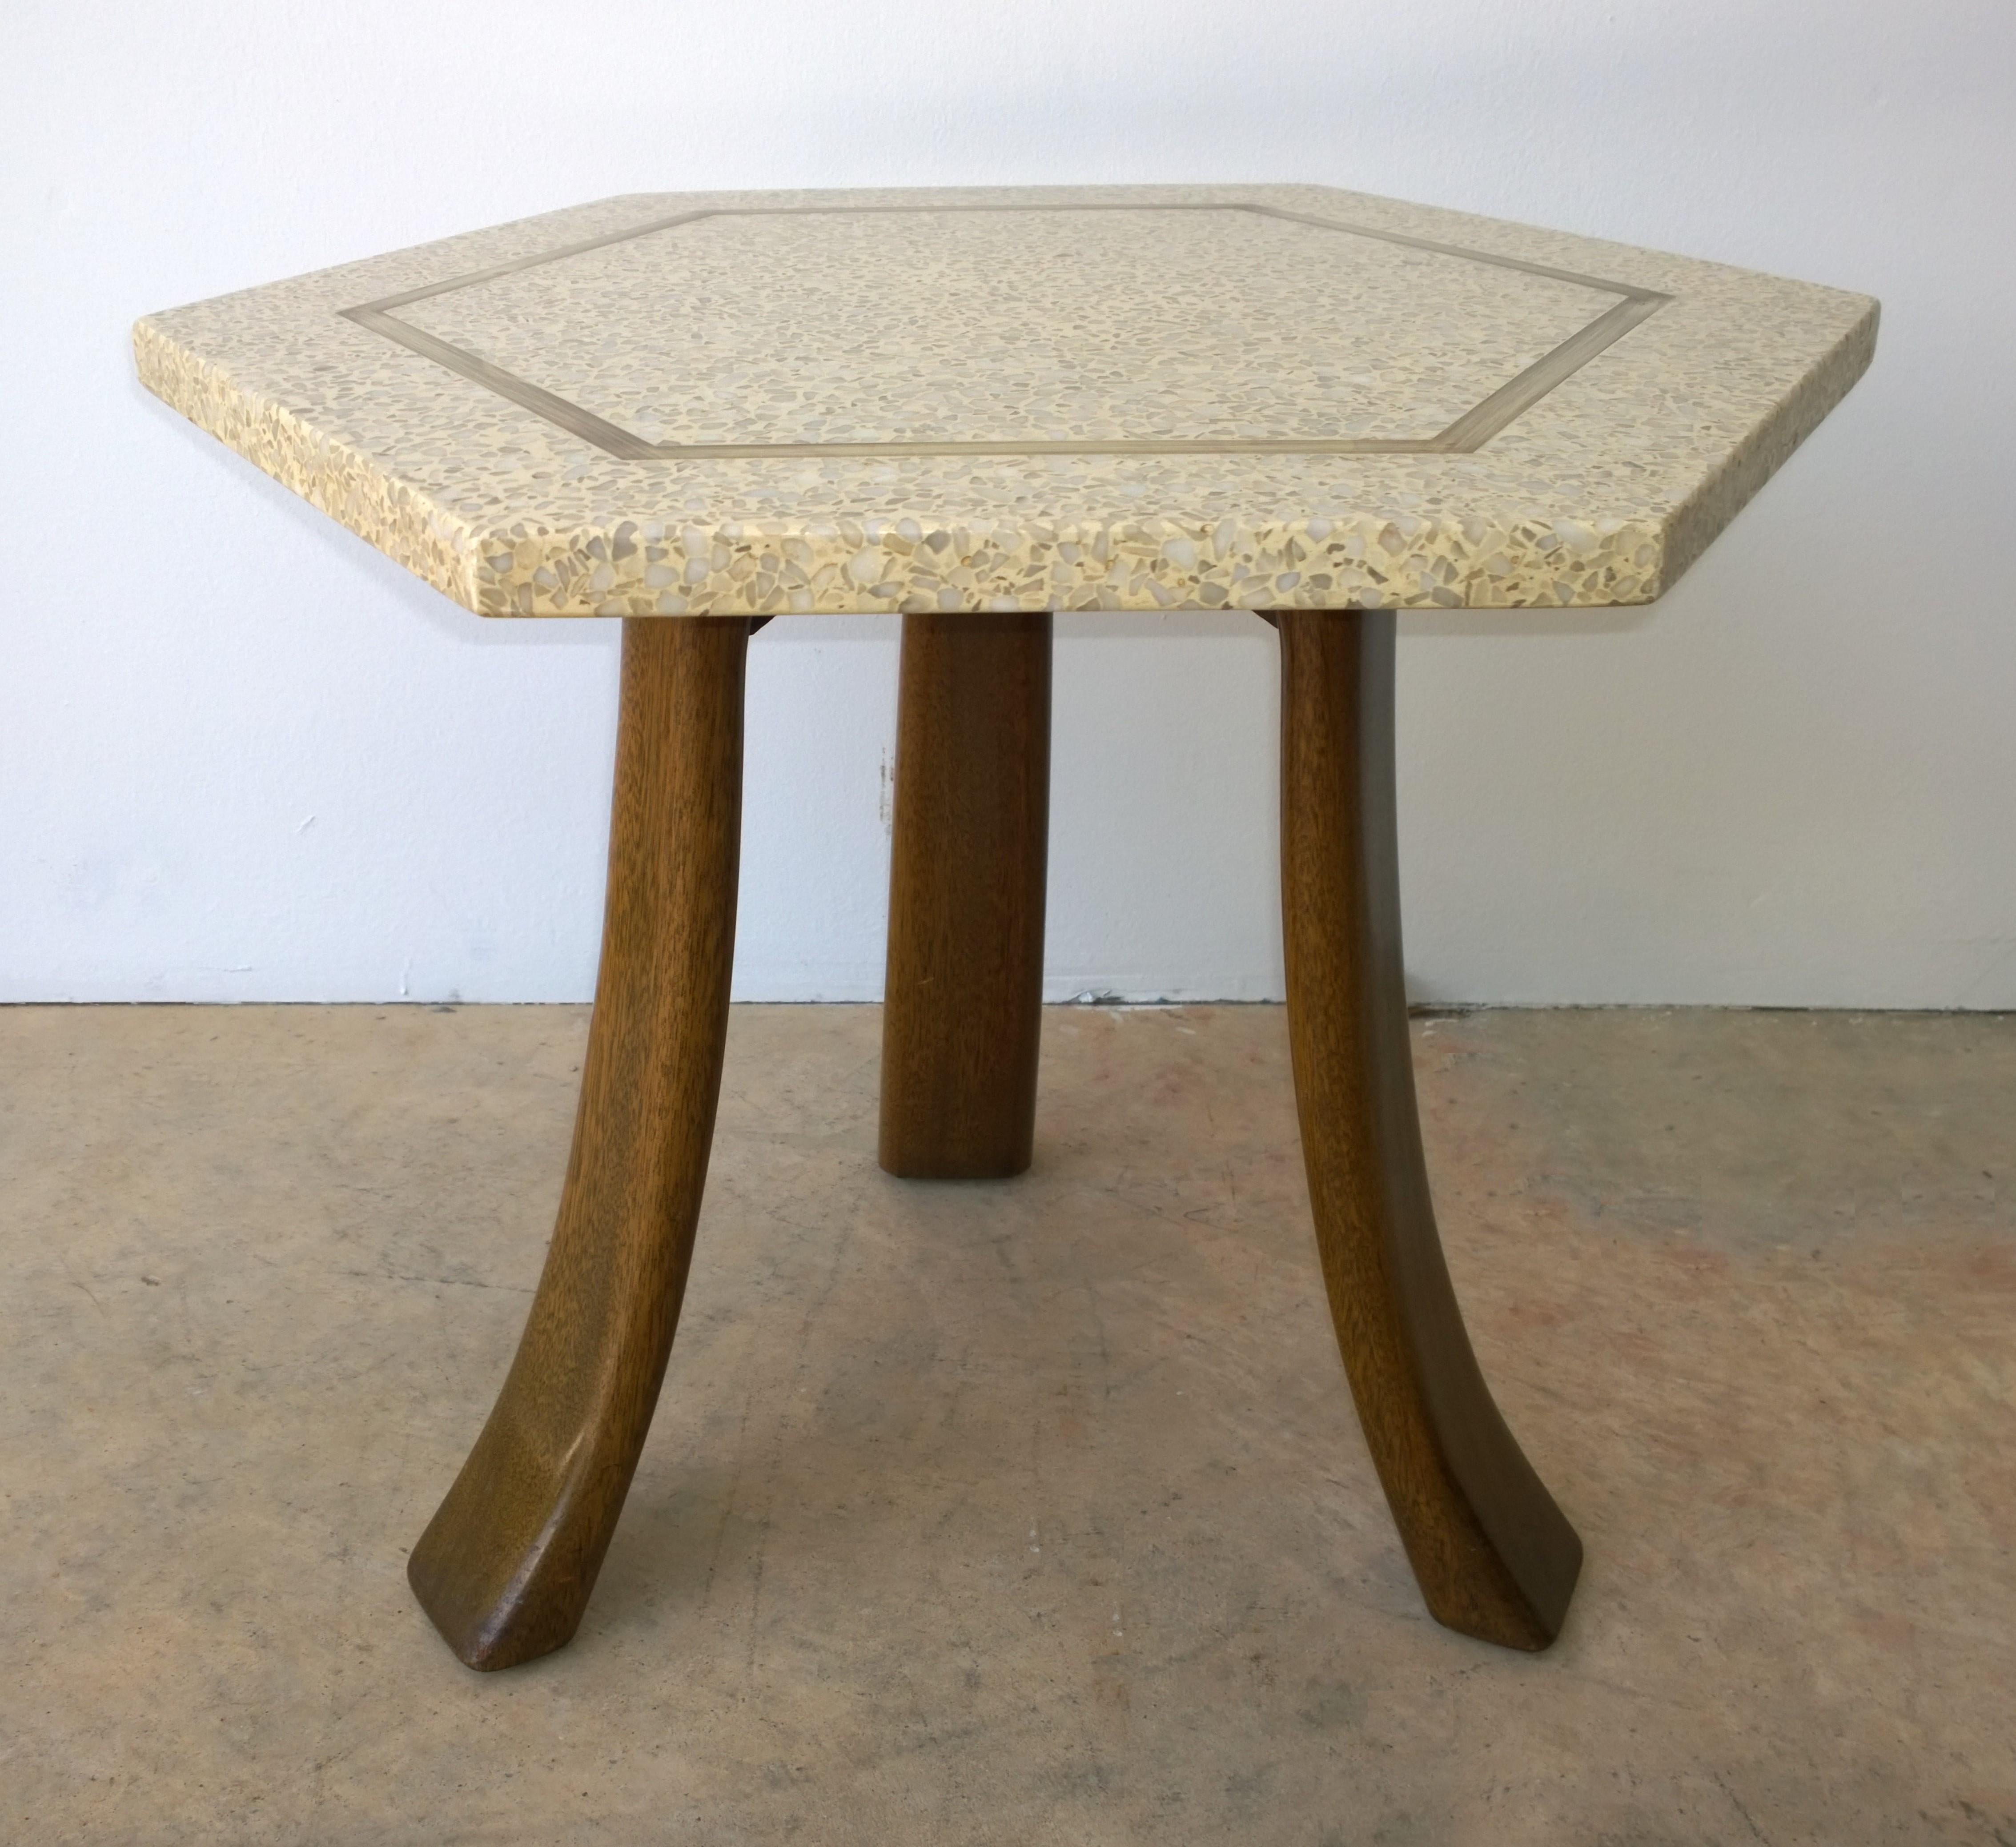 Offered is a Mid-Century Modern Harvey Probber blue and creamy white terrazzo stone hexagon shaped top with brass inlay on splayed tripod mahogany legs side / end / occasional table. The iconic Harvey Probber tripod side table design was produced